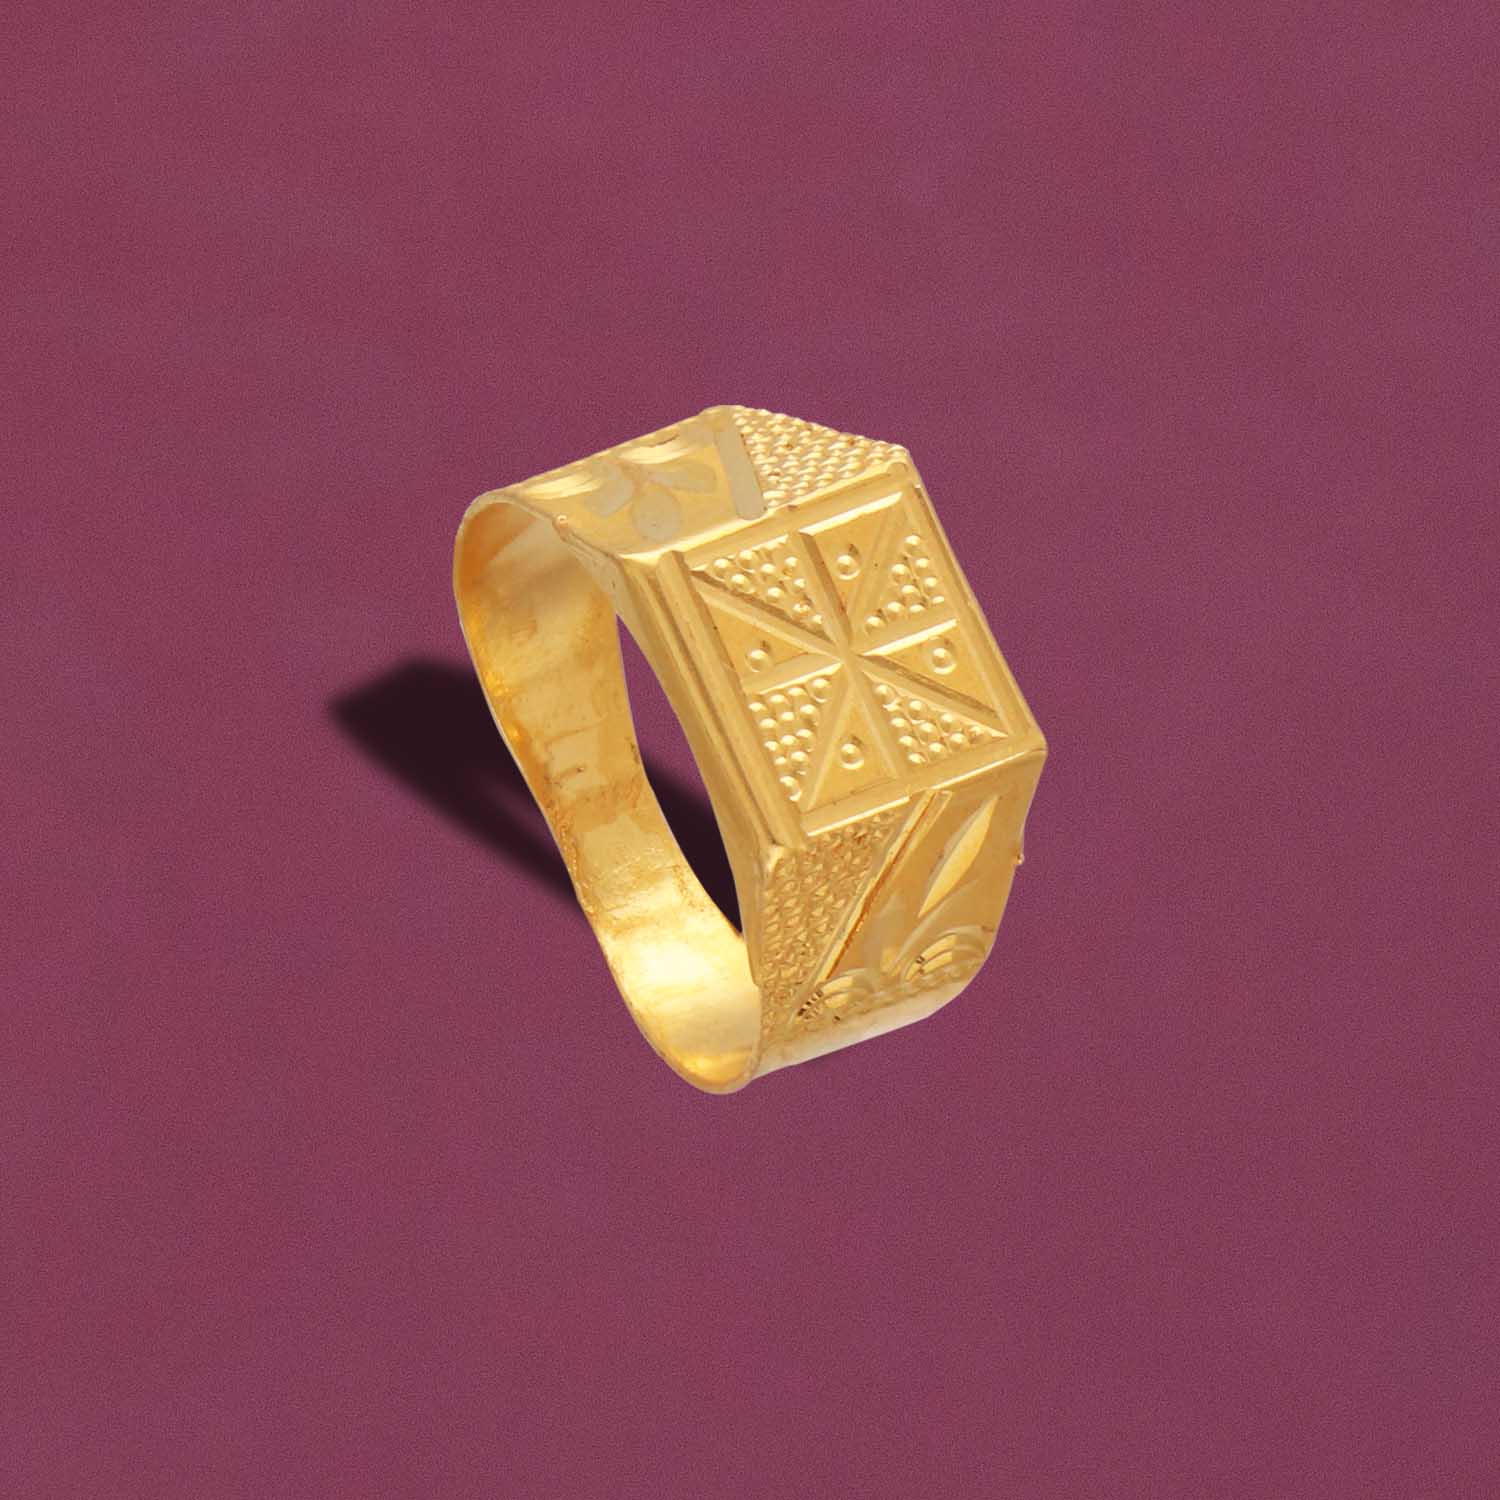 Personalized Monogram Ring - Square Initial Letter Ring - Silver and Gold |  MasonArtStore